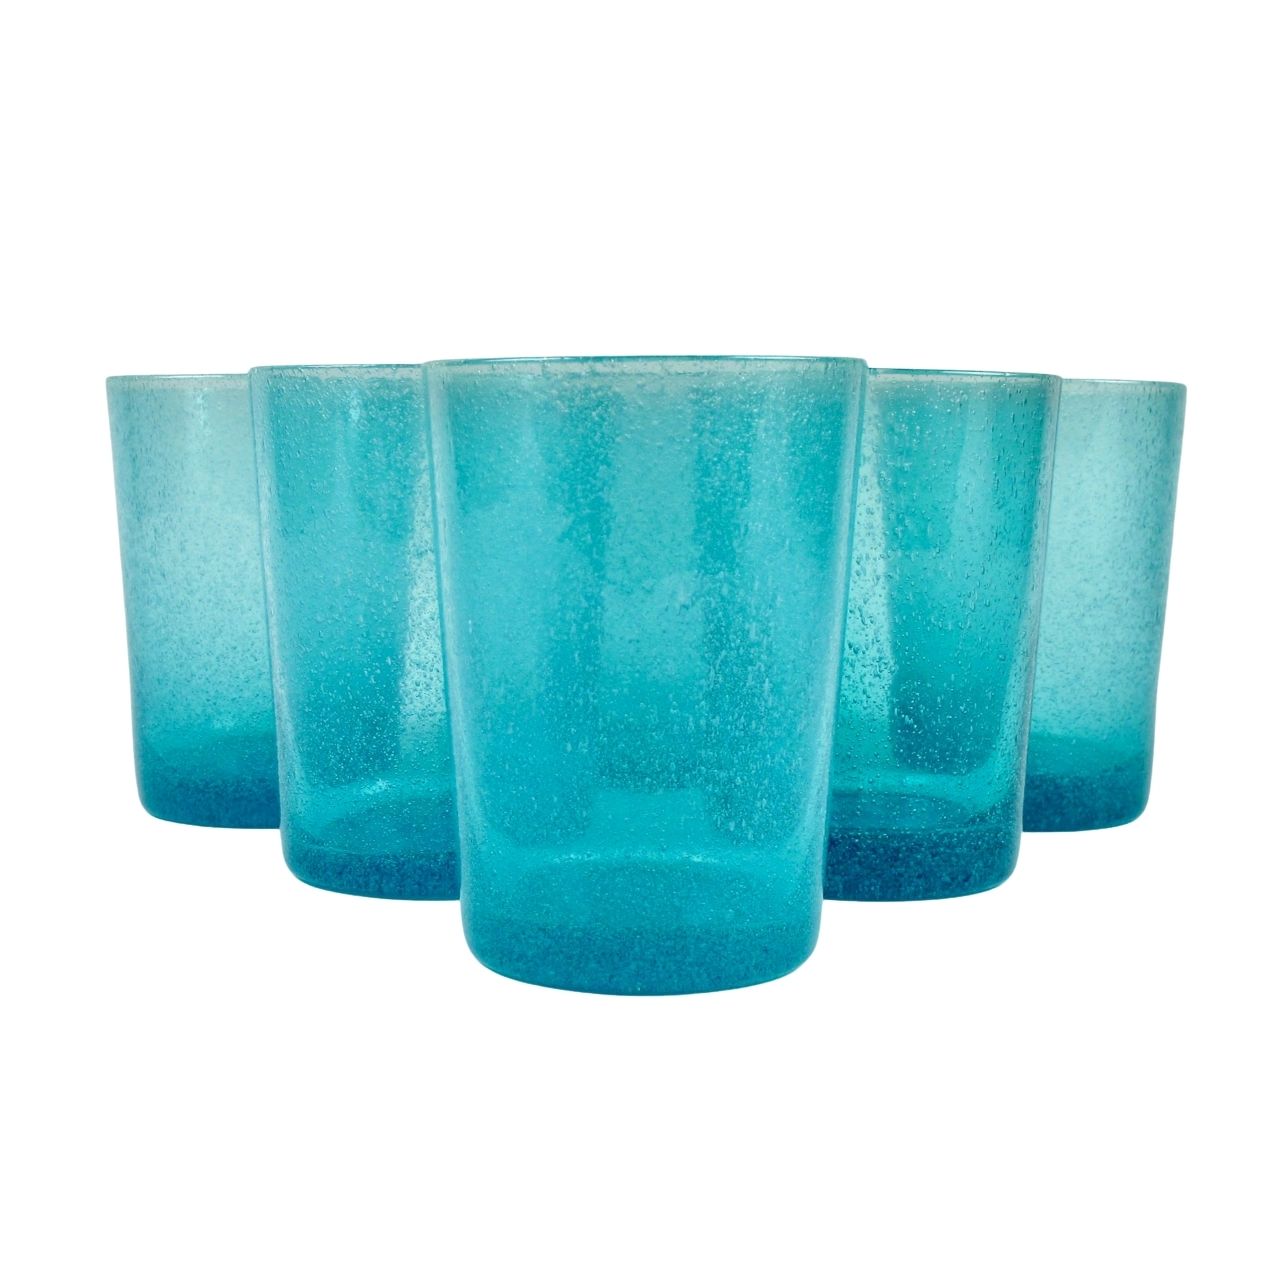 British Colour Standard Boxed Set of 6 Recycled Glass Tumblers - Honey Bird